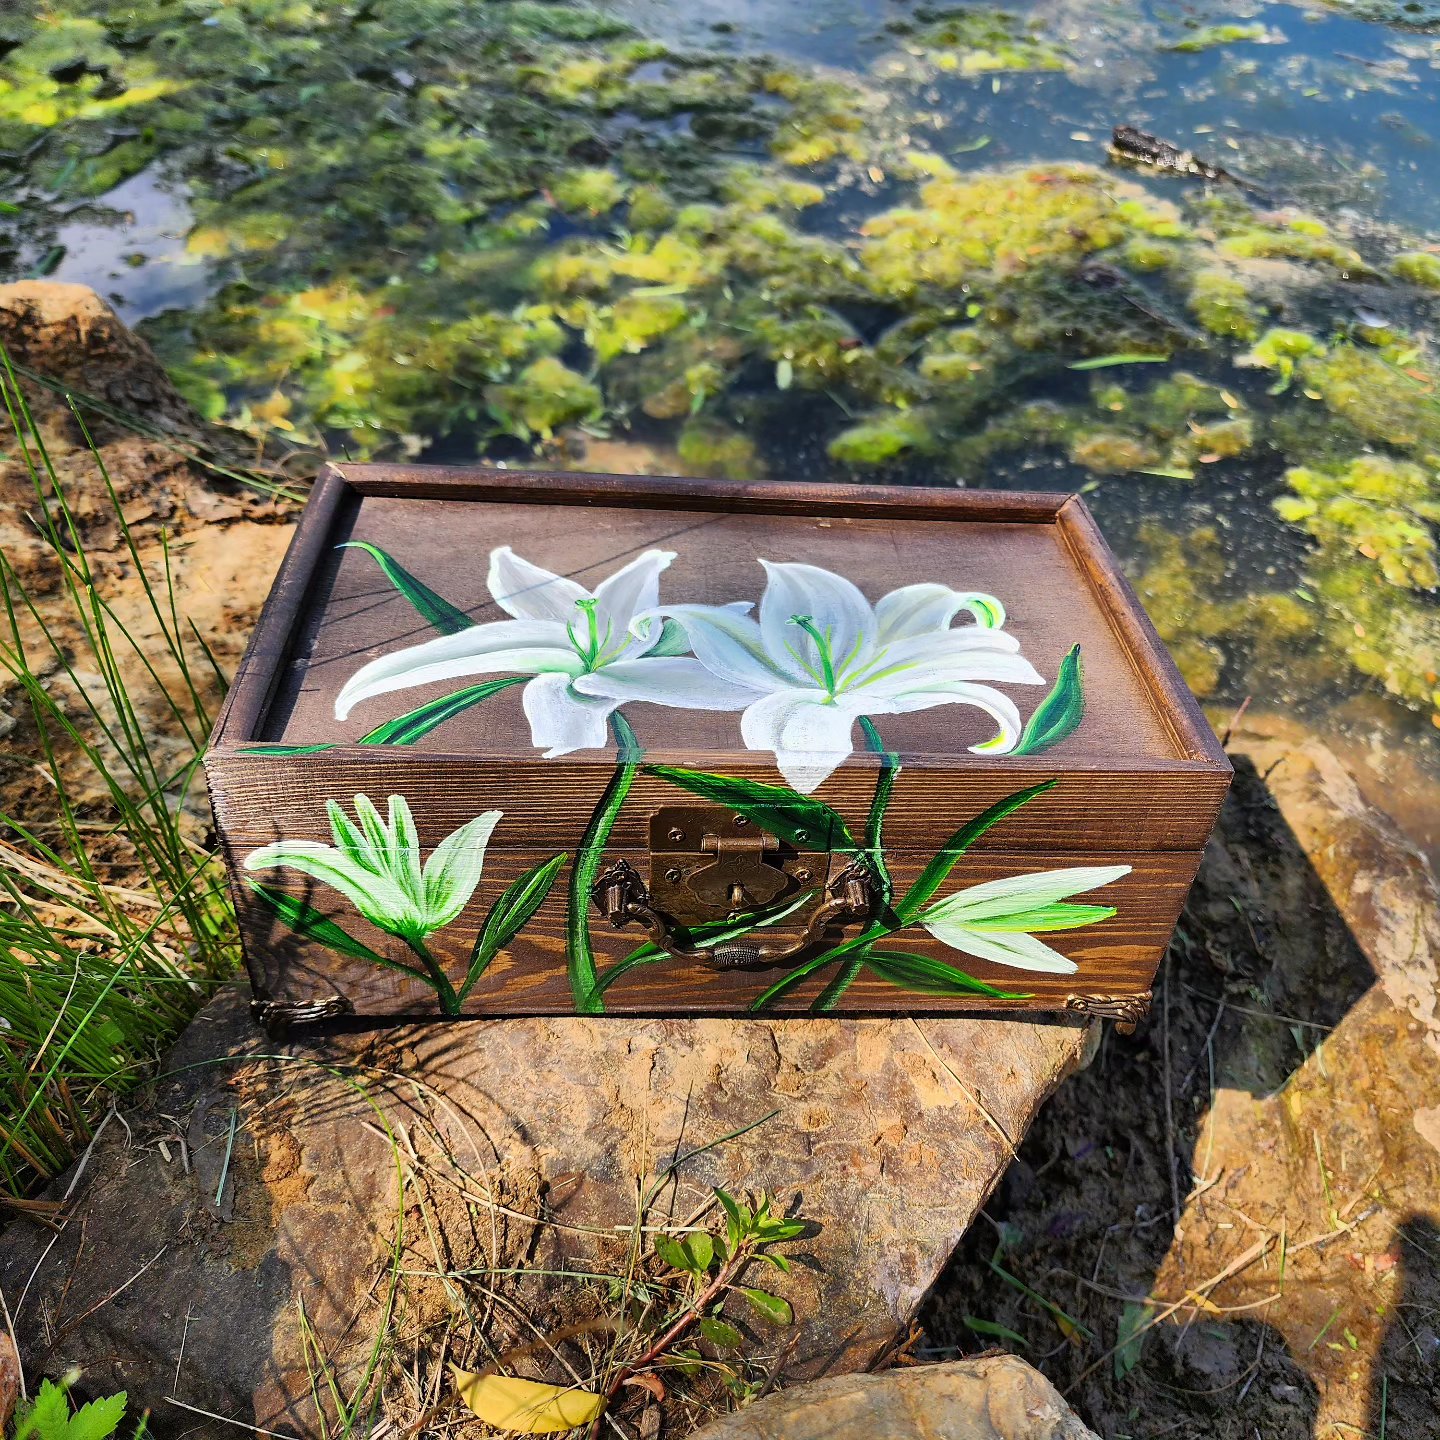 Handpainted wooden jewelry box with original design of white asiatic lilies. This jewelry box comes with a nice mirror inside, metal feet, and bronze plated clasps. The box includes compartments that lift to store more jewelry.